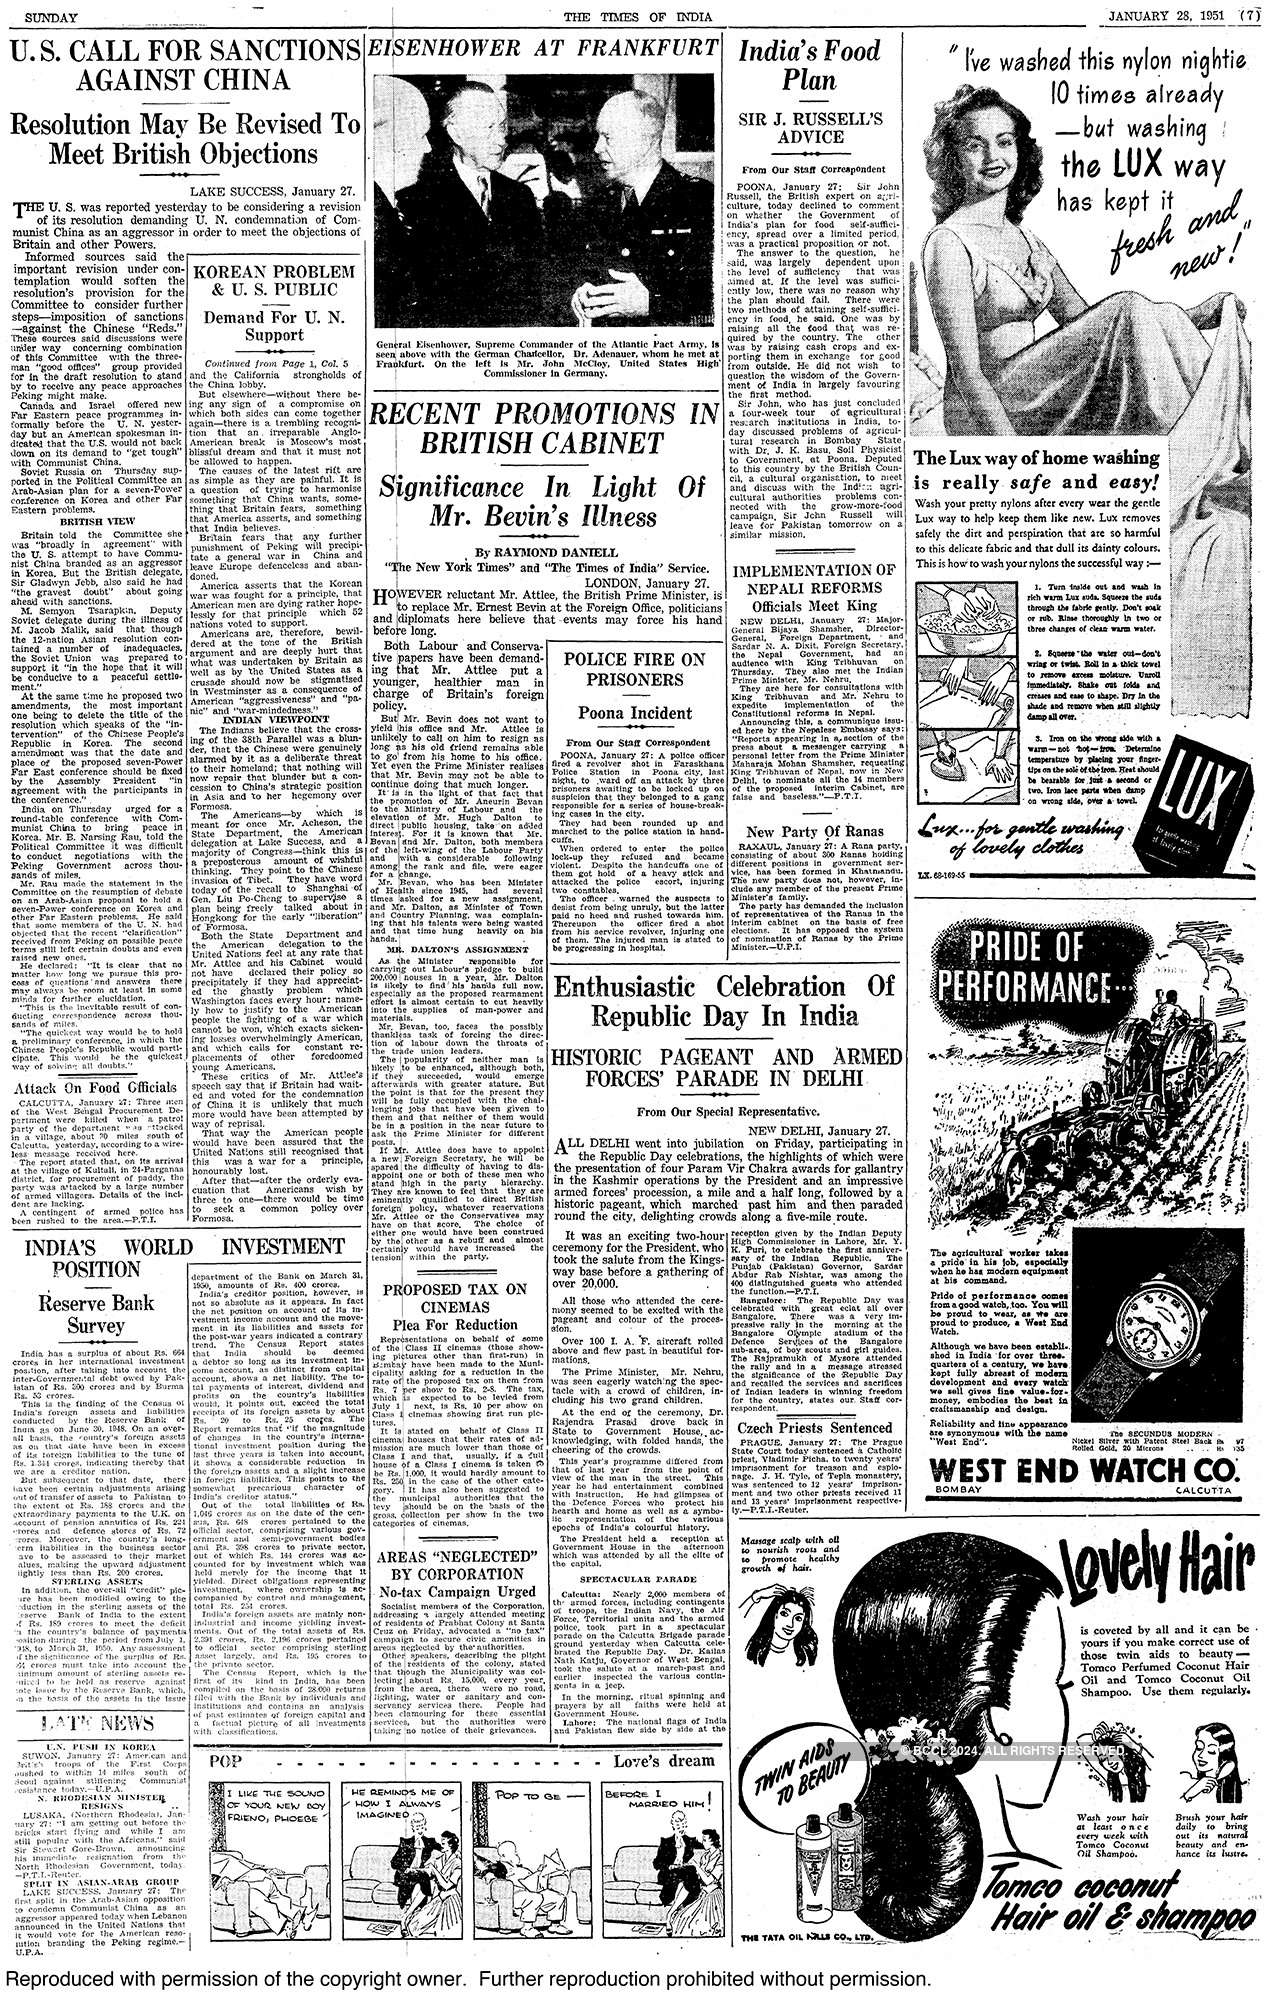 Republic Day through the years from The Times of India's archives